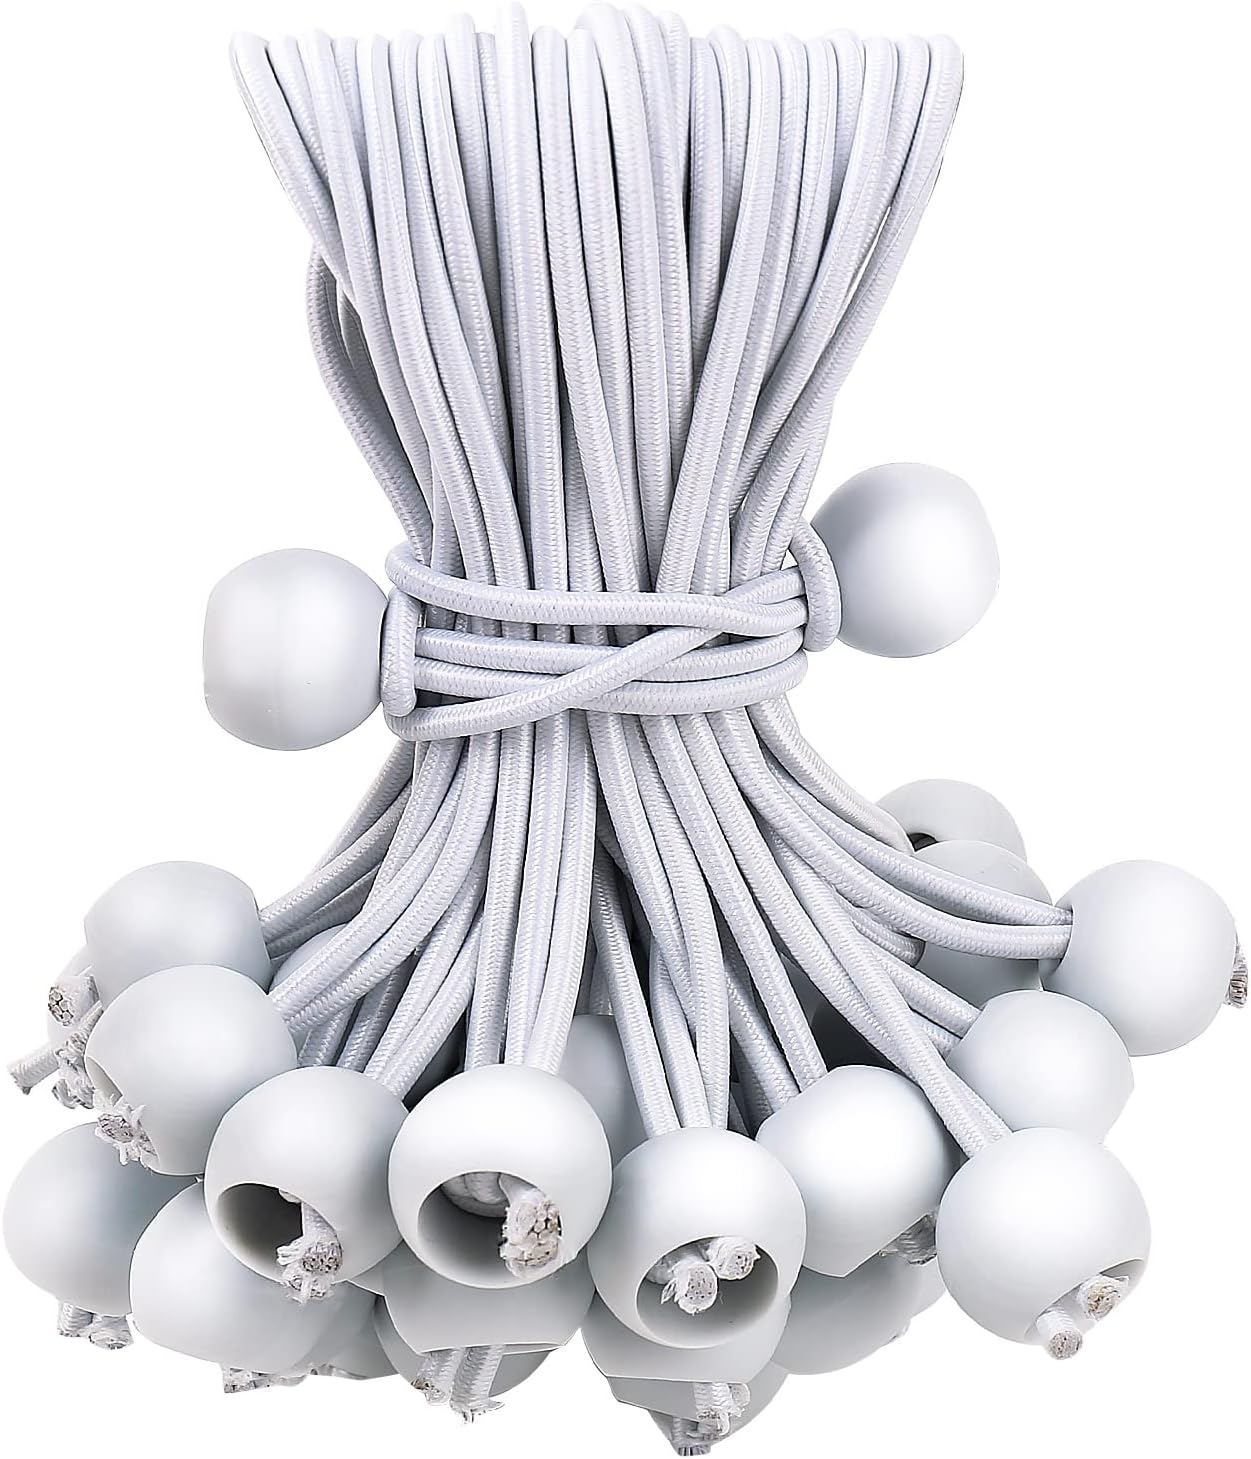 SkyTened 50PCS Mini White Ball Bungee Cords, 4 Inch Heavy Duty Outdoor Bungee Cord with Balls, Tarp Tie Down Bungee Balls for Shelter, C